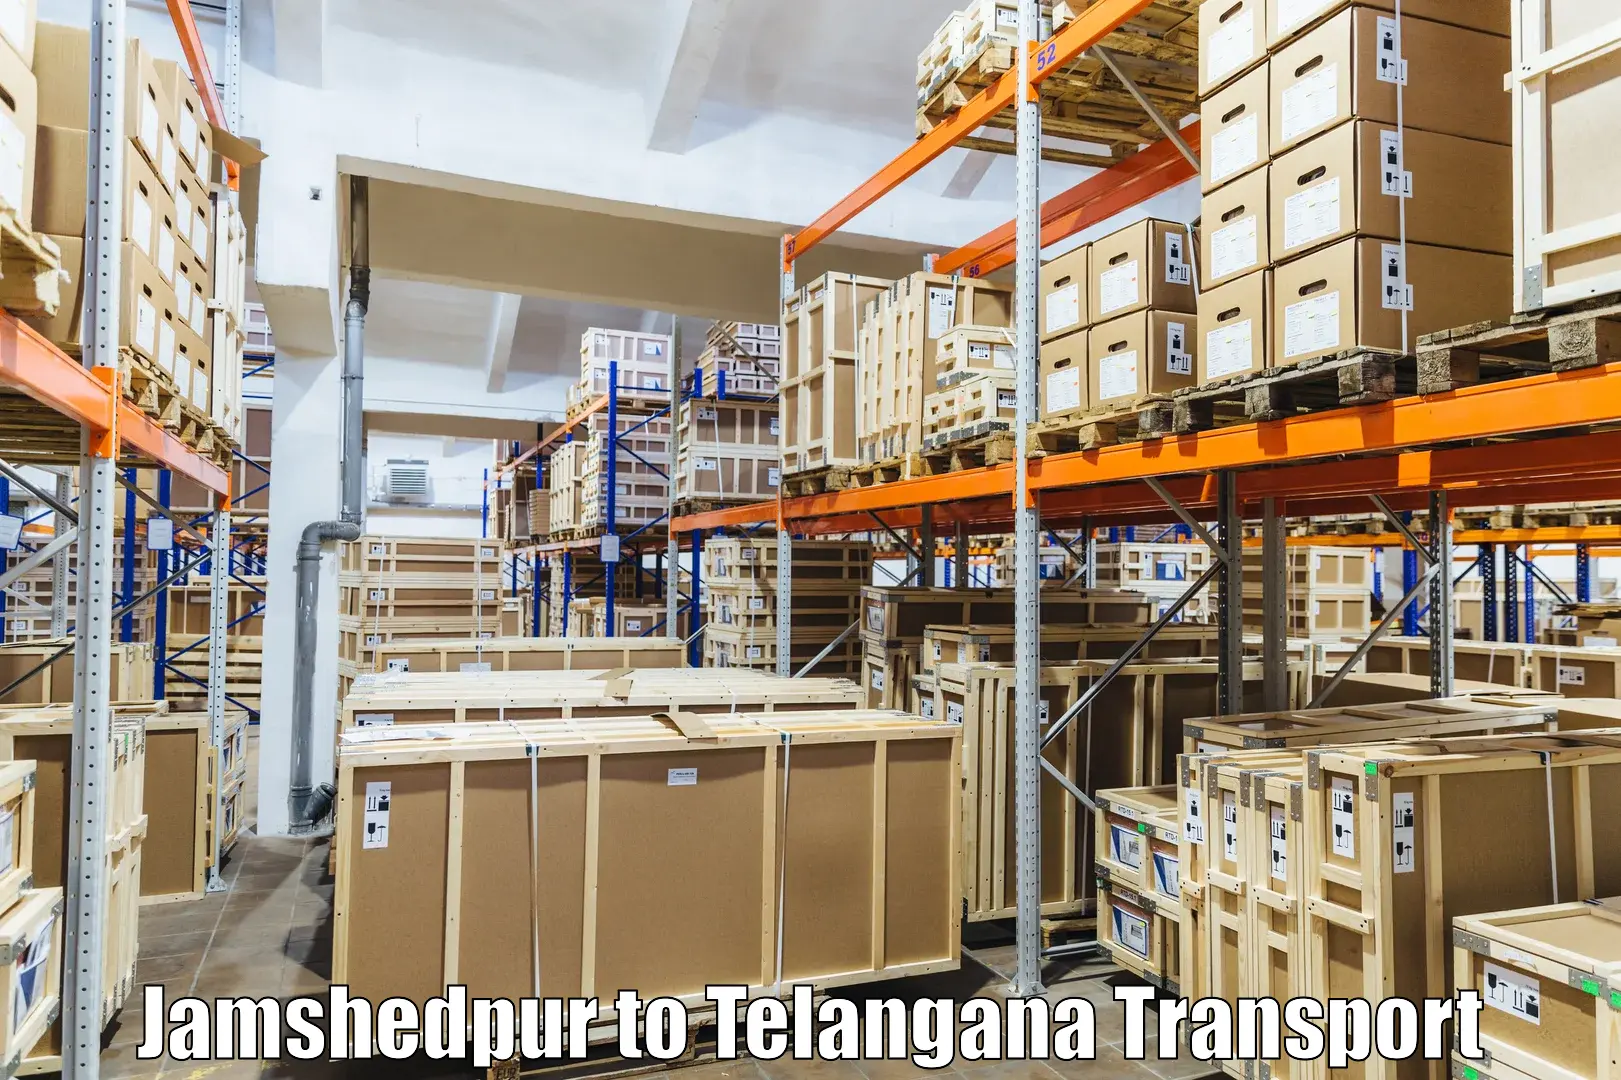 Daily parcel service transport in Jamshedpur to Amangal